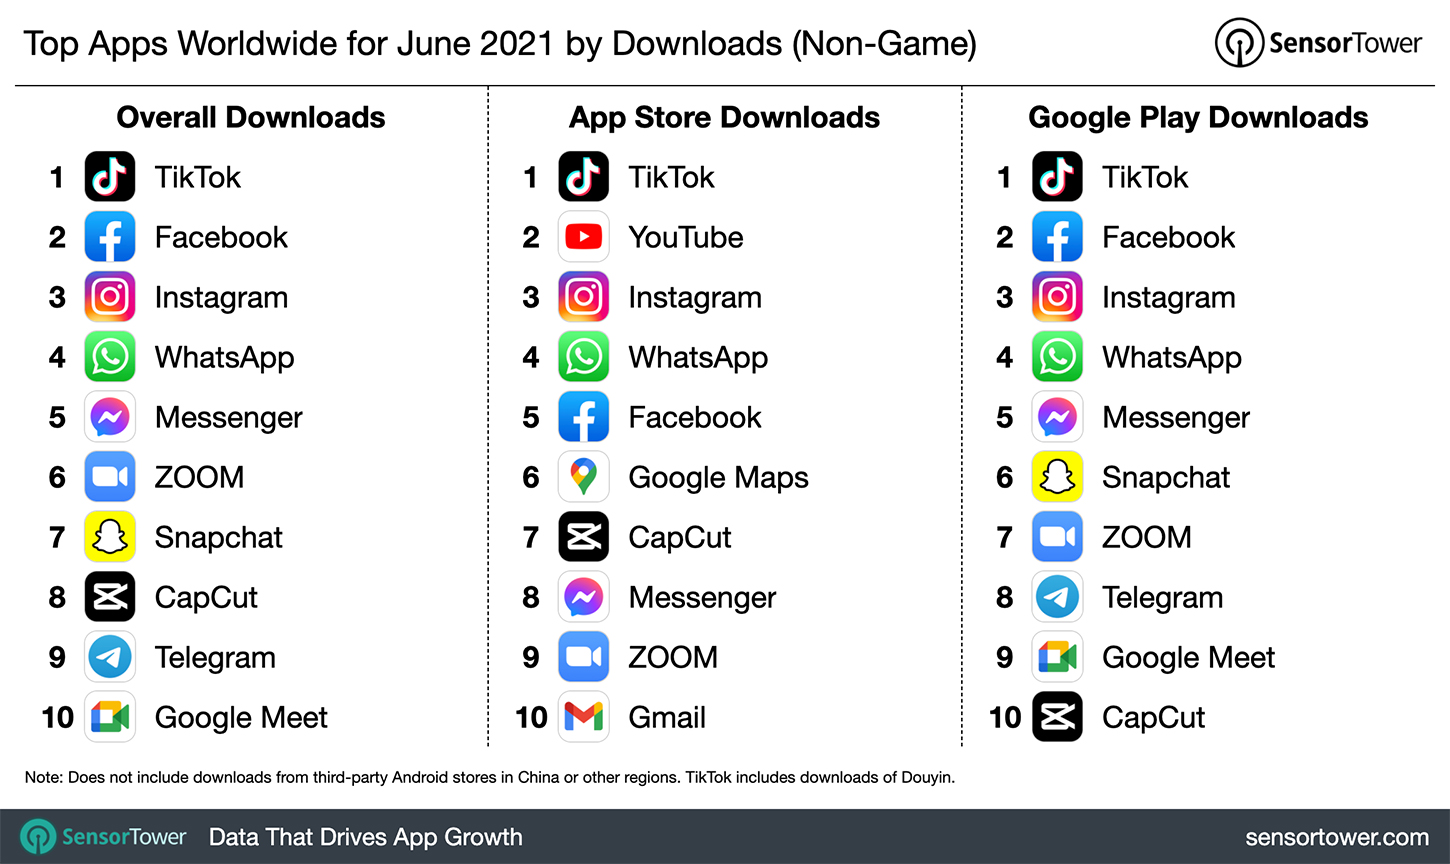 Top Apps Worldwide for June 2021 by Downloads